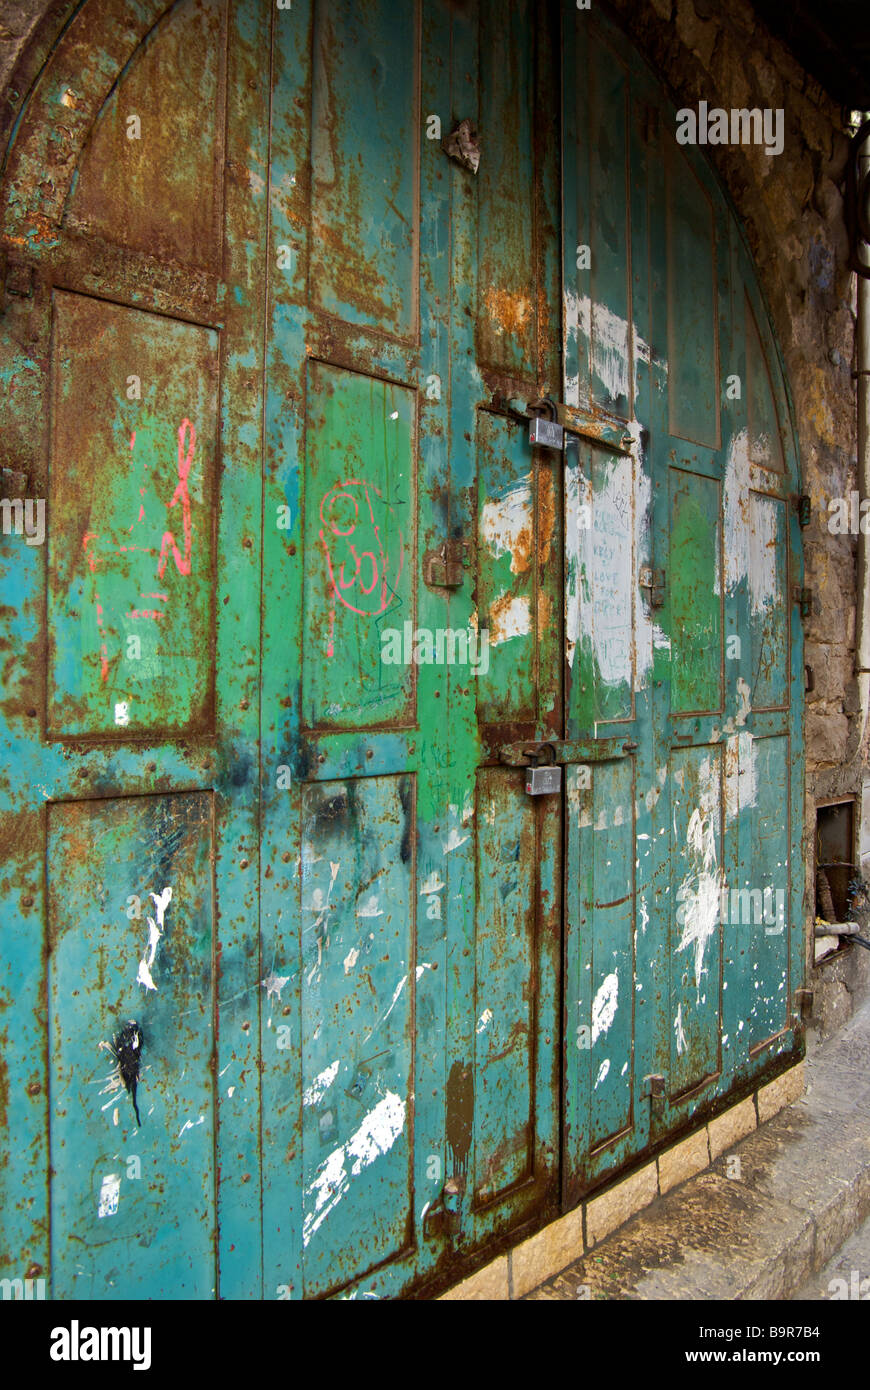 Locked rusted steel doors of a closed shop stall at Arab market in ...